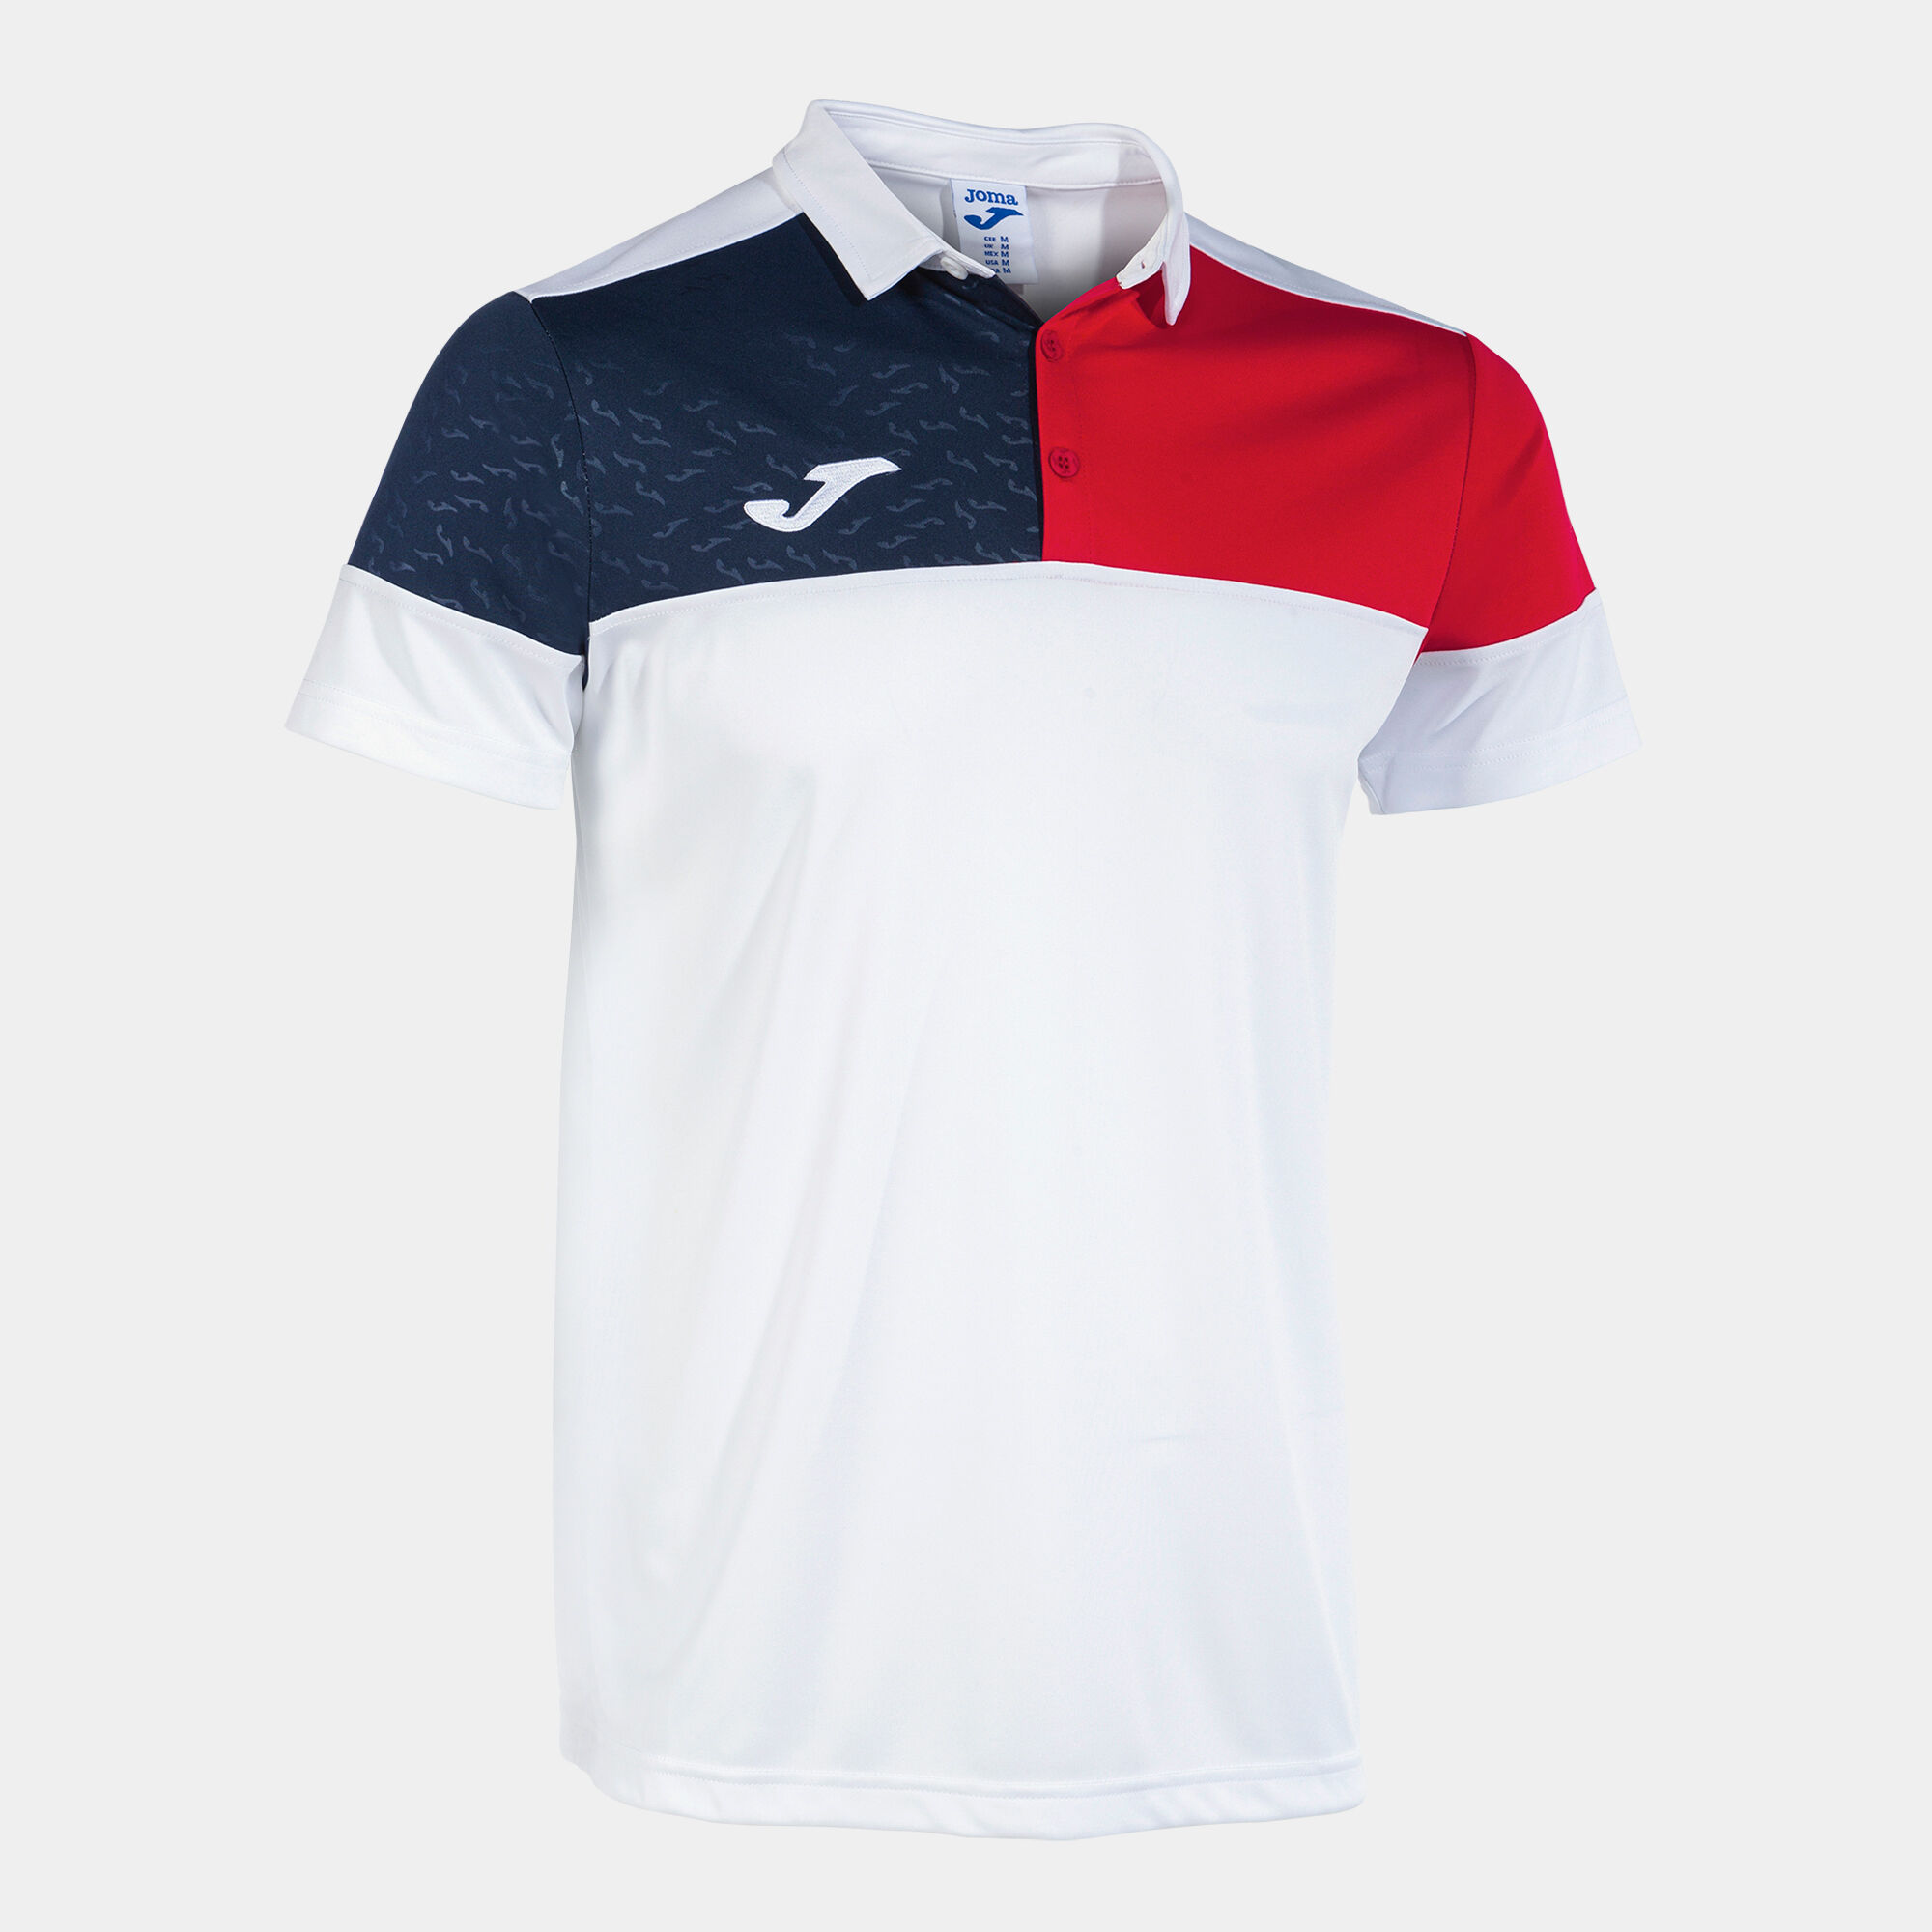 Polo manches courtes homme Crew V blanc rouge